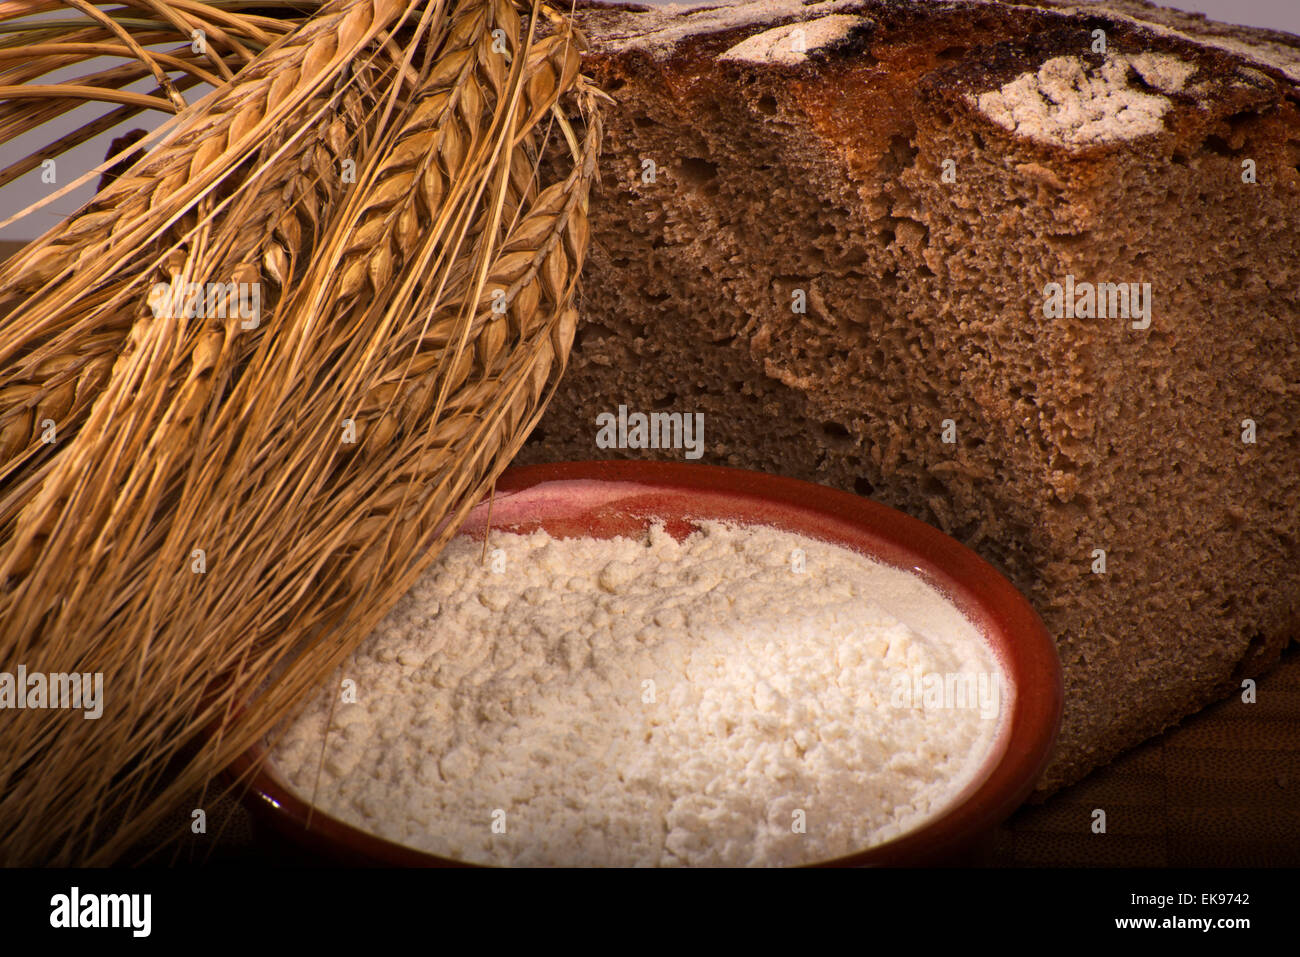 bread with cereal and farina Stock Photo